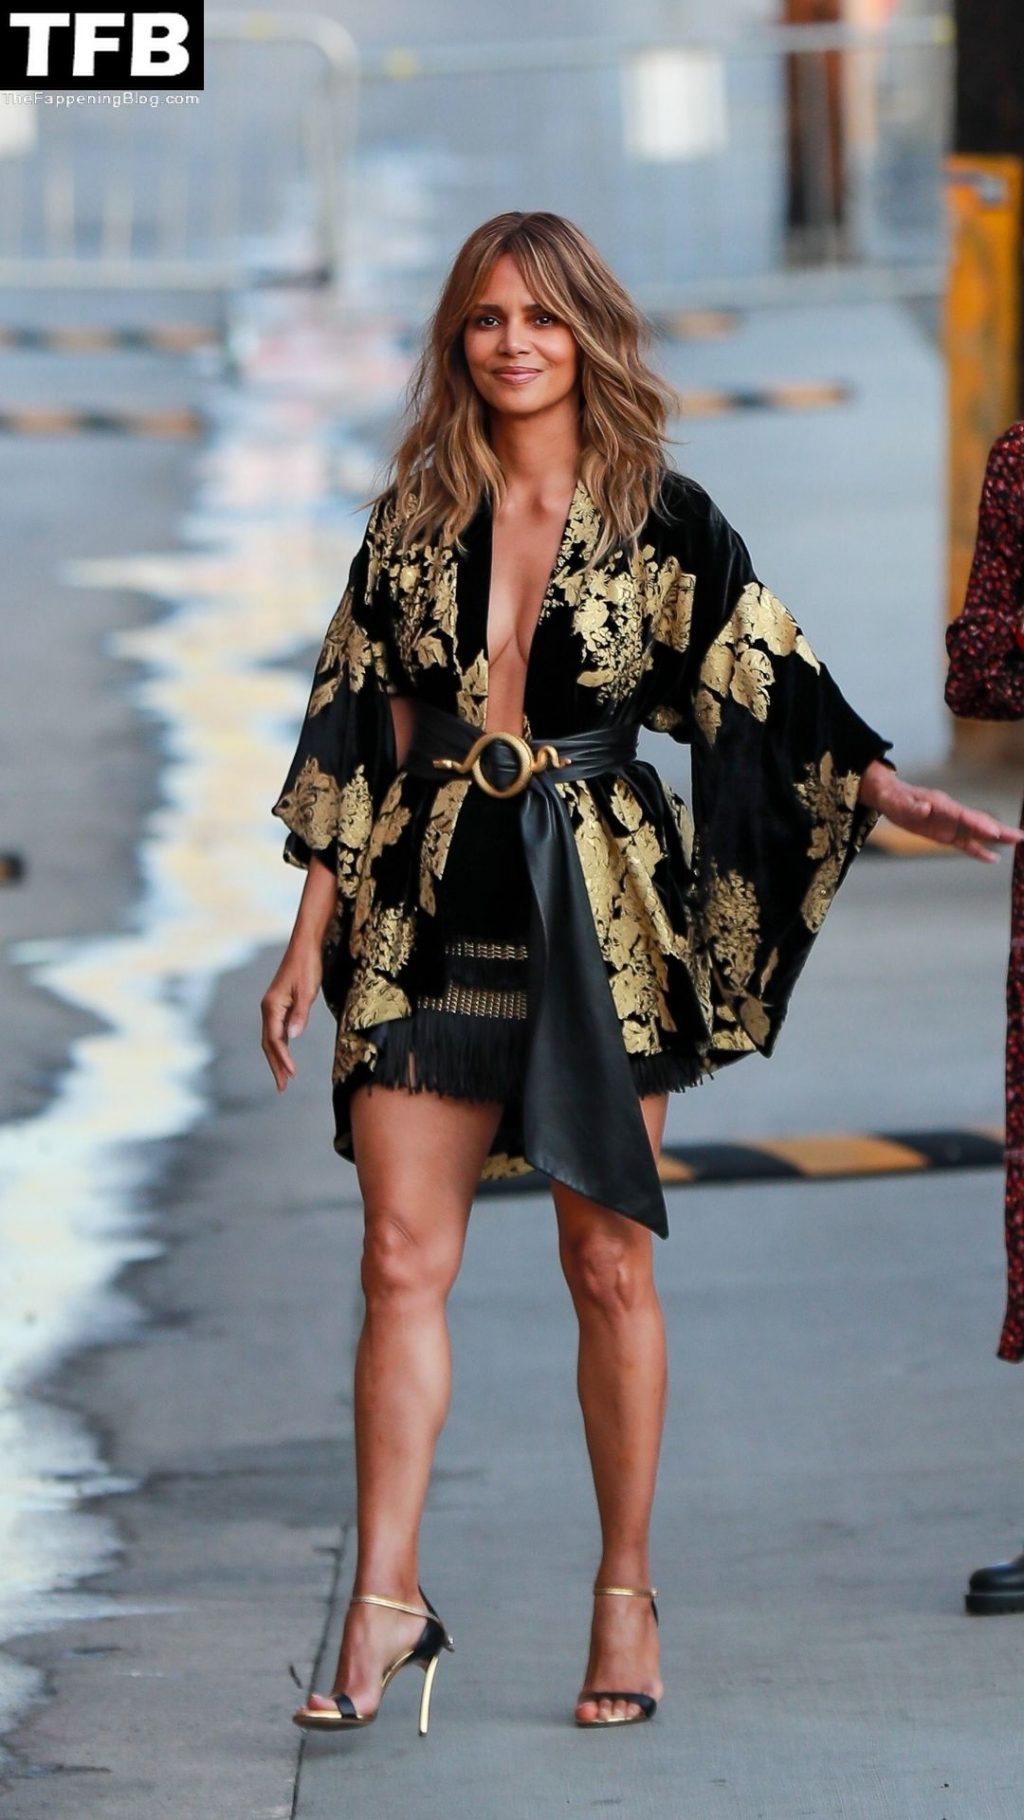 Halle Berry Stuns the Crowd at Jimmy Kimmel Live! in a Sexy Black and Gold Dress (147 Photos)